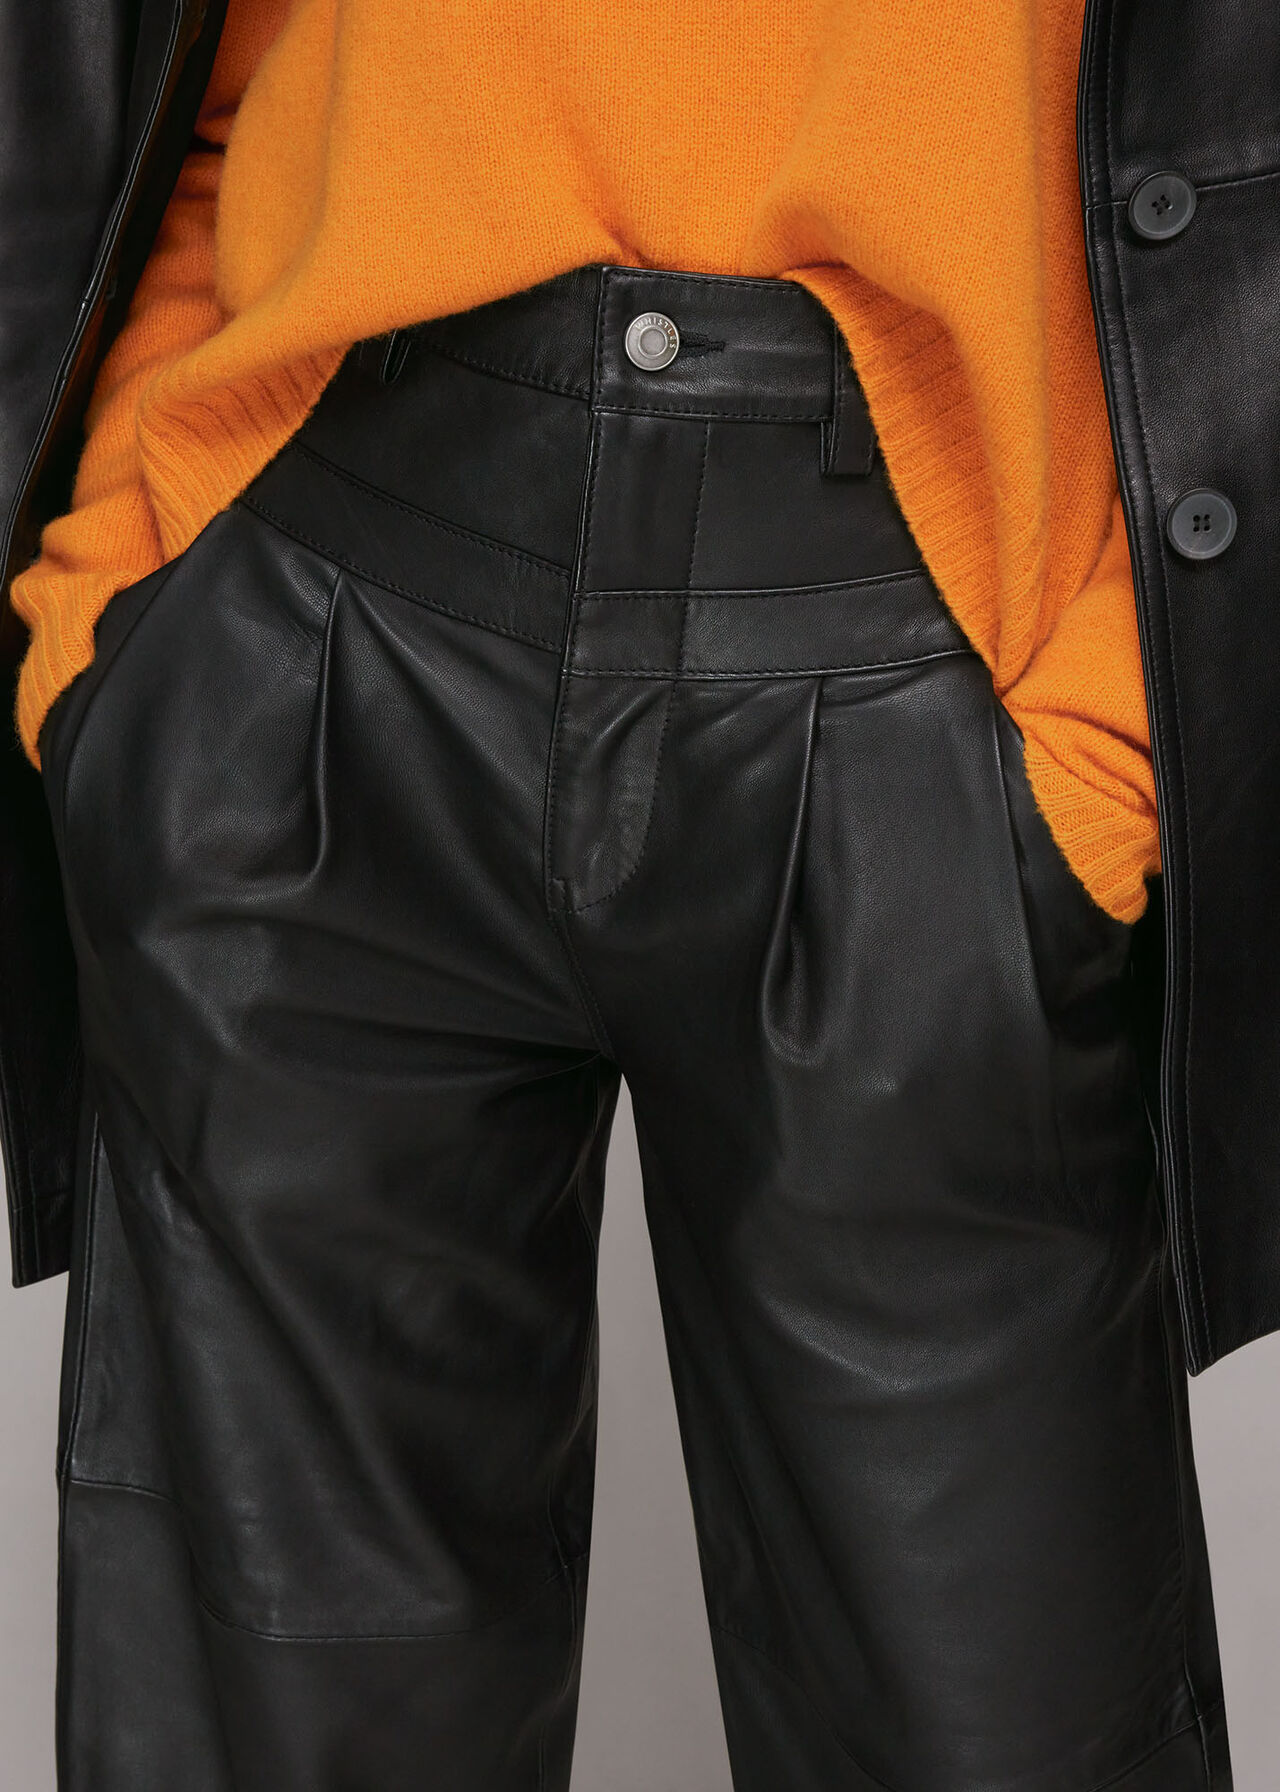 India Leather Pleat Trouser